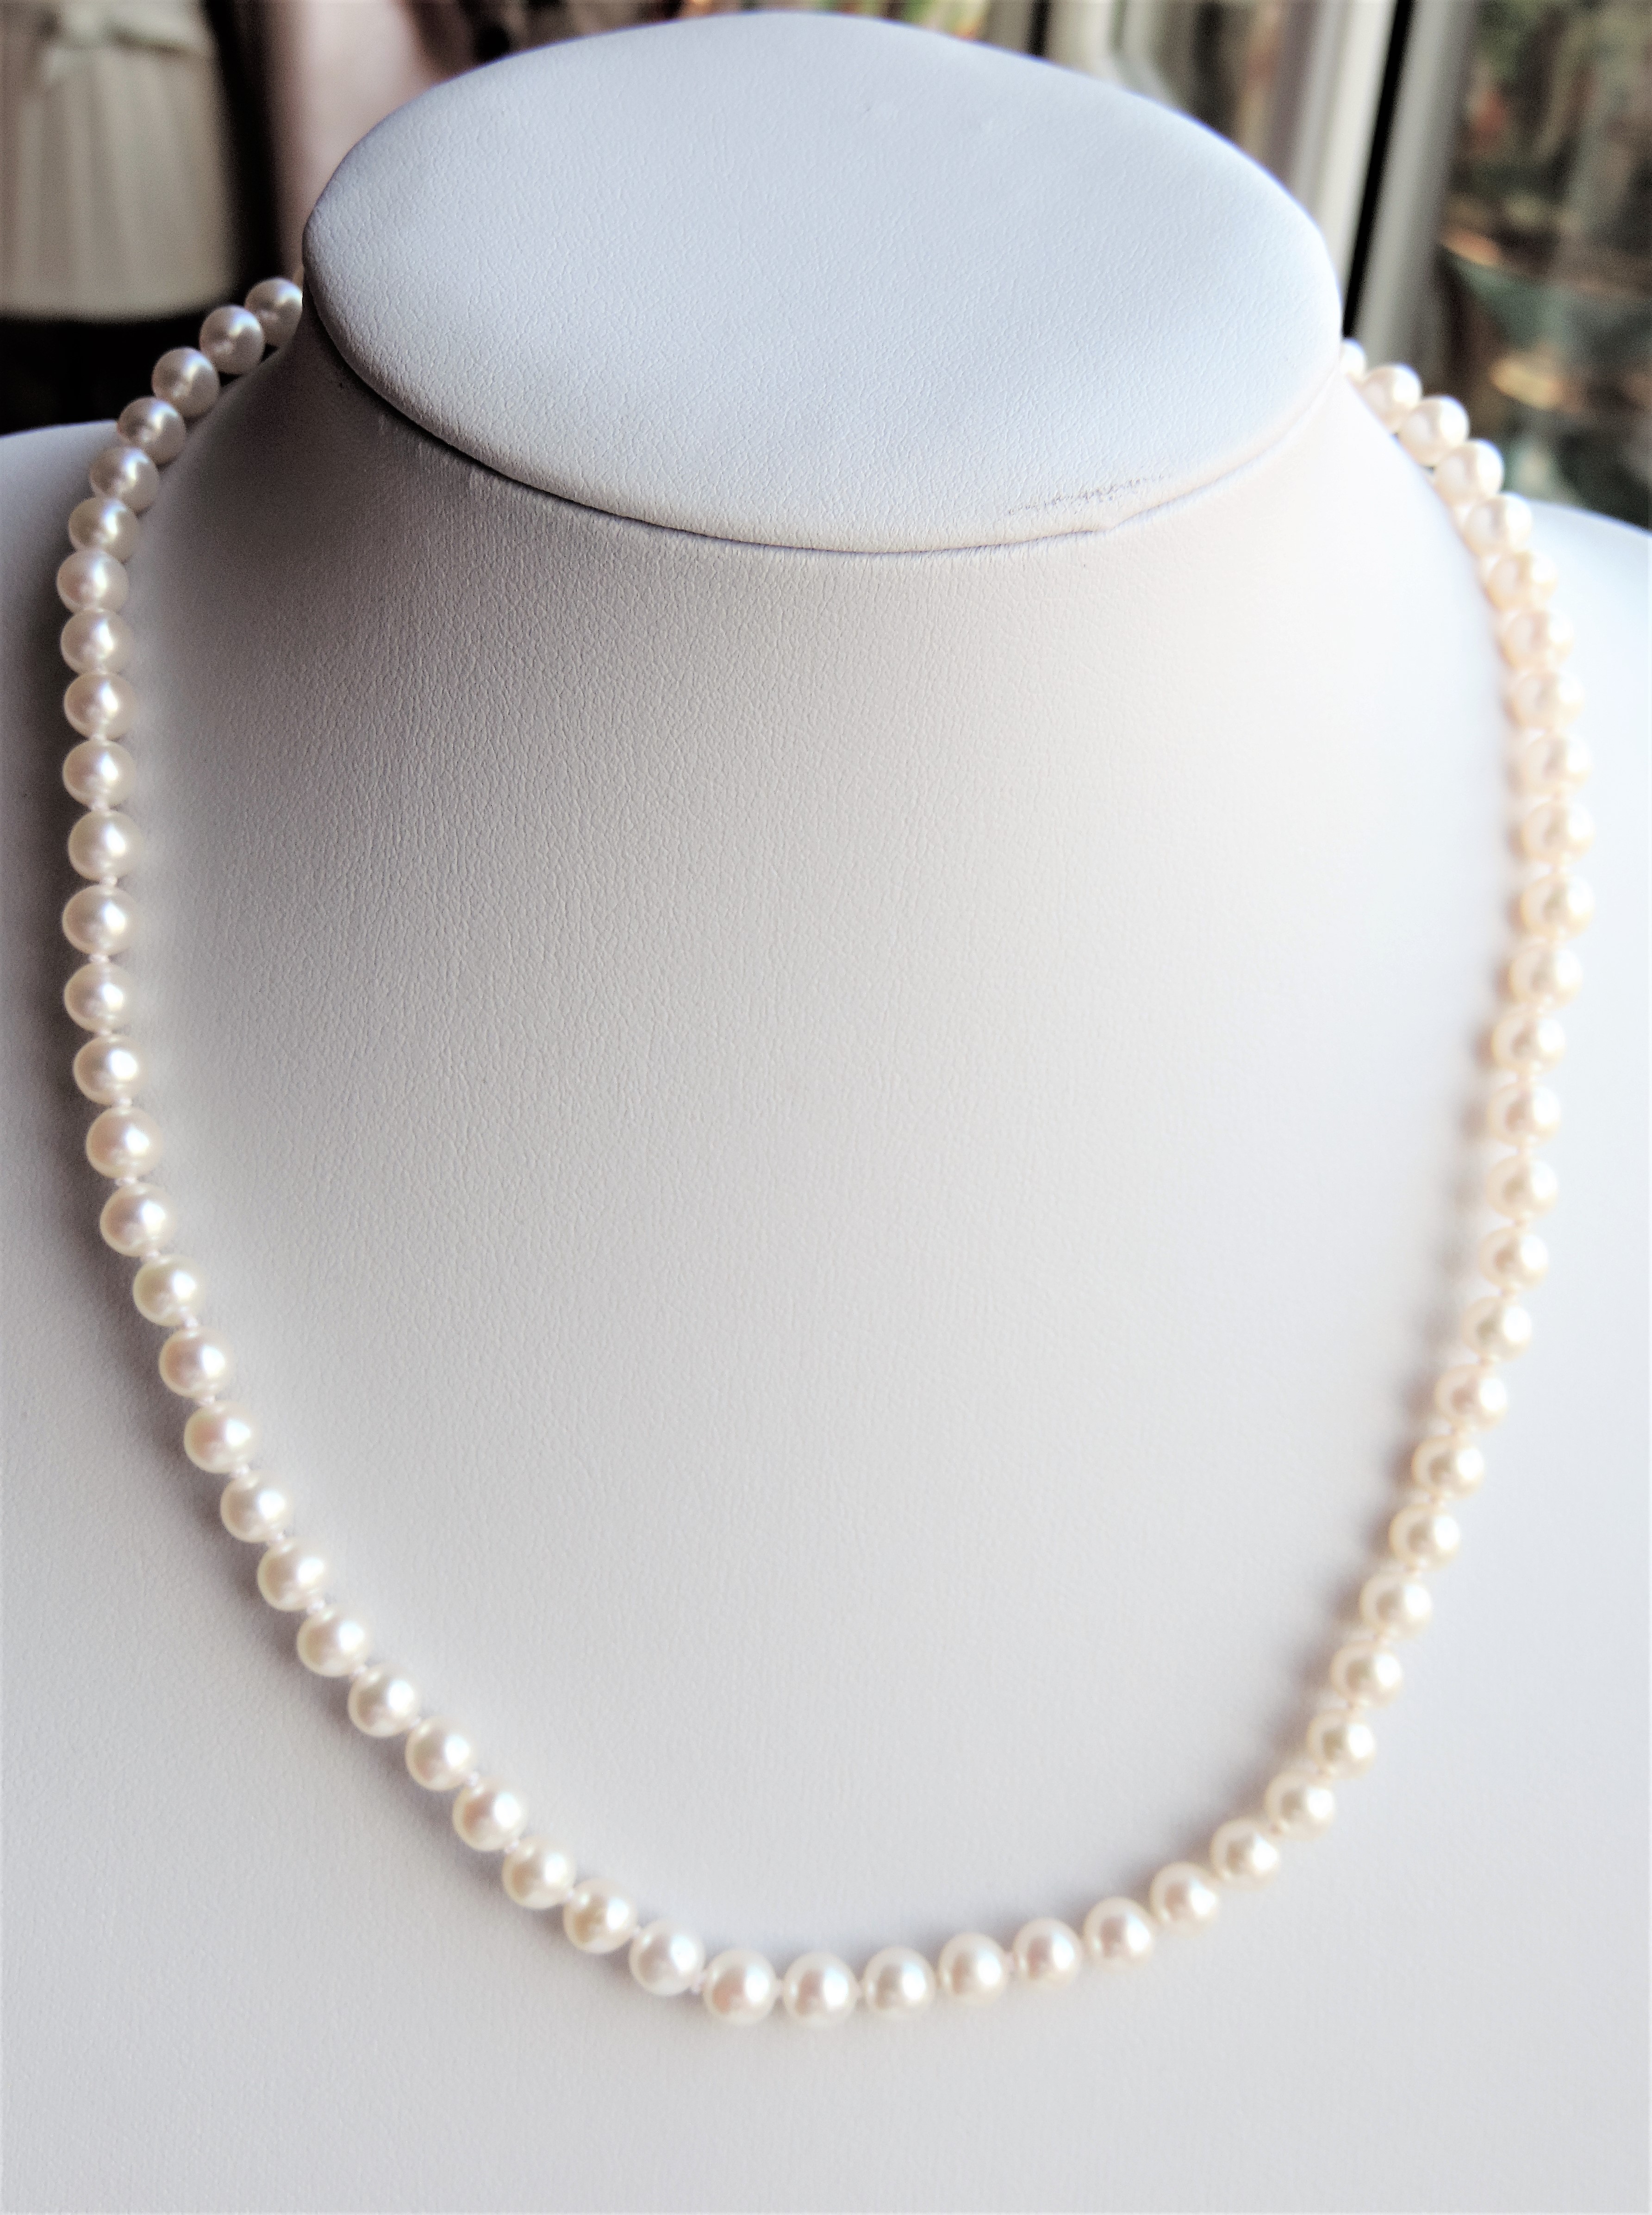 17 inch Cultured Pearl Necklace 75 x 5mm Pearls Silver Clasp